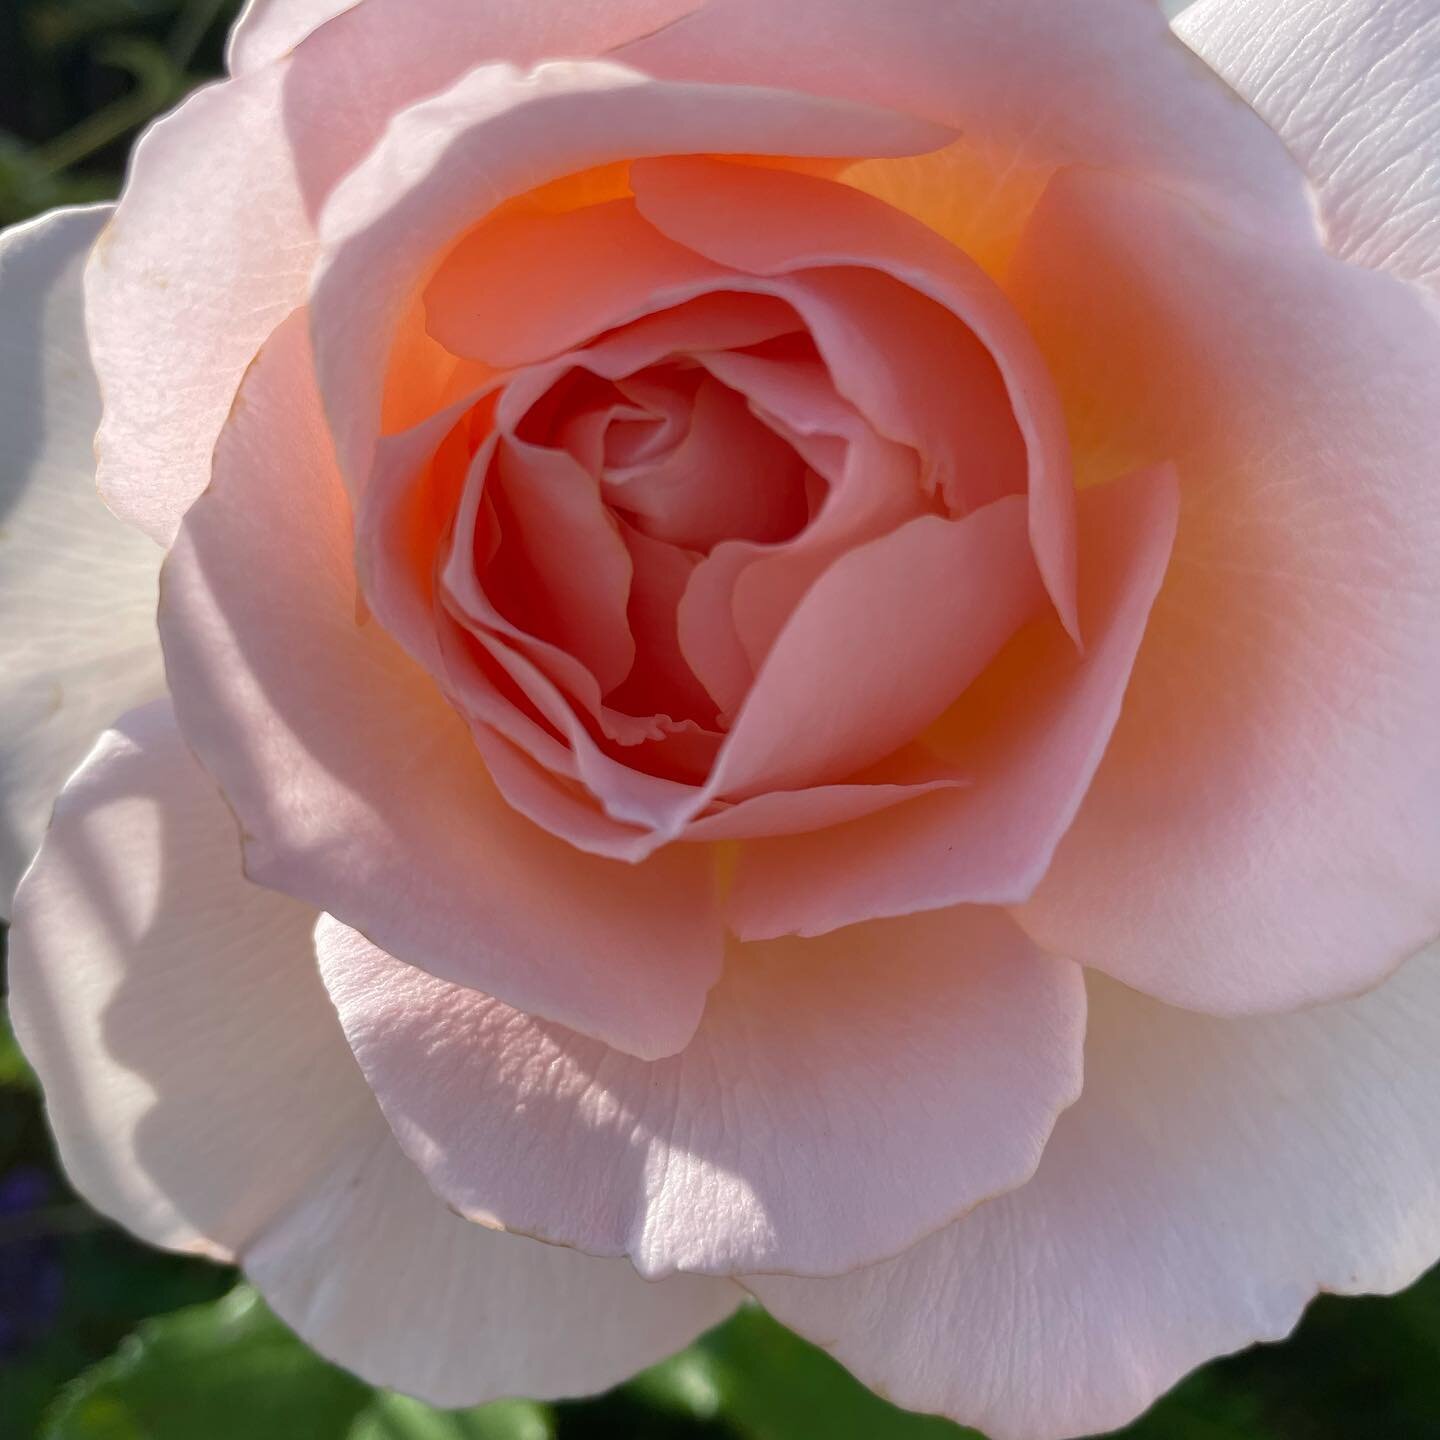 The roses are appreciating the sun after all the rain. R &lsquo;Chandos Beauty&rsquo; is just the perfect rose - love it for its smell, healthy foliage and beautiful flower. R &lsquo;Olivia Rose Austin&rsquo; is a proper welcome by the front door und